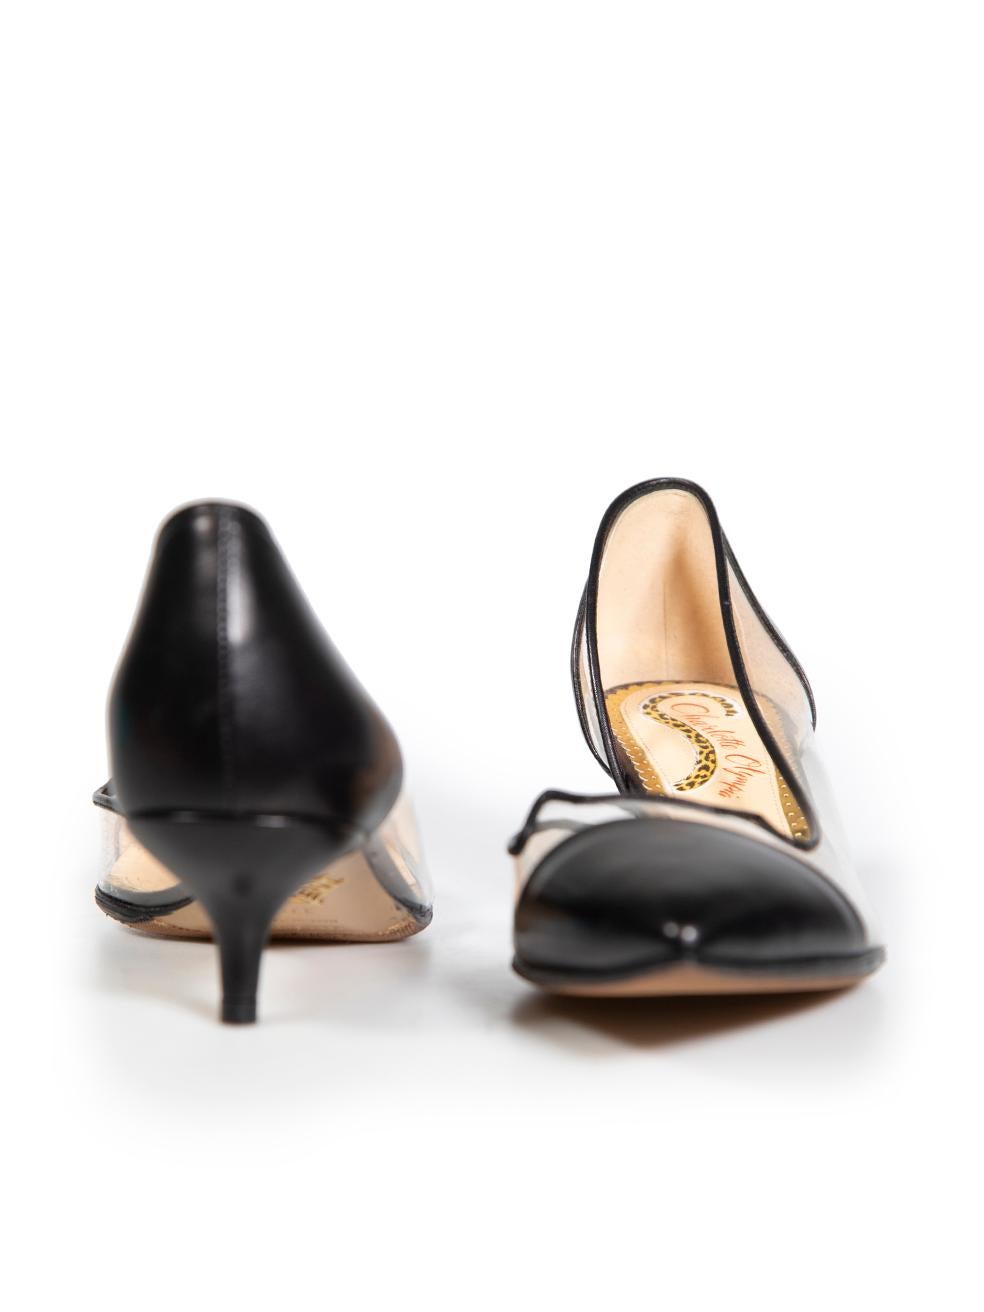 Charlotte Olympia Black PVC & Leather Panel Heels Size IT 37.5 In Good Condition For Sale In London, GB